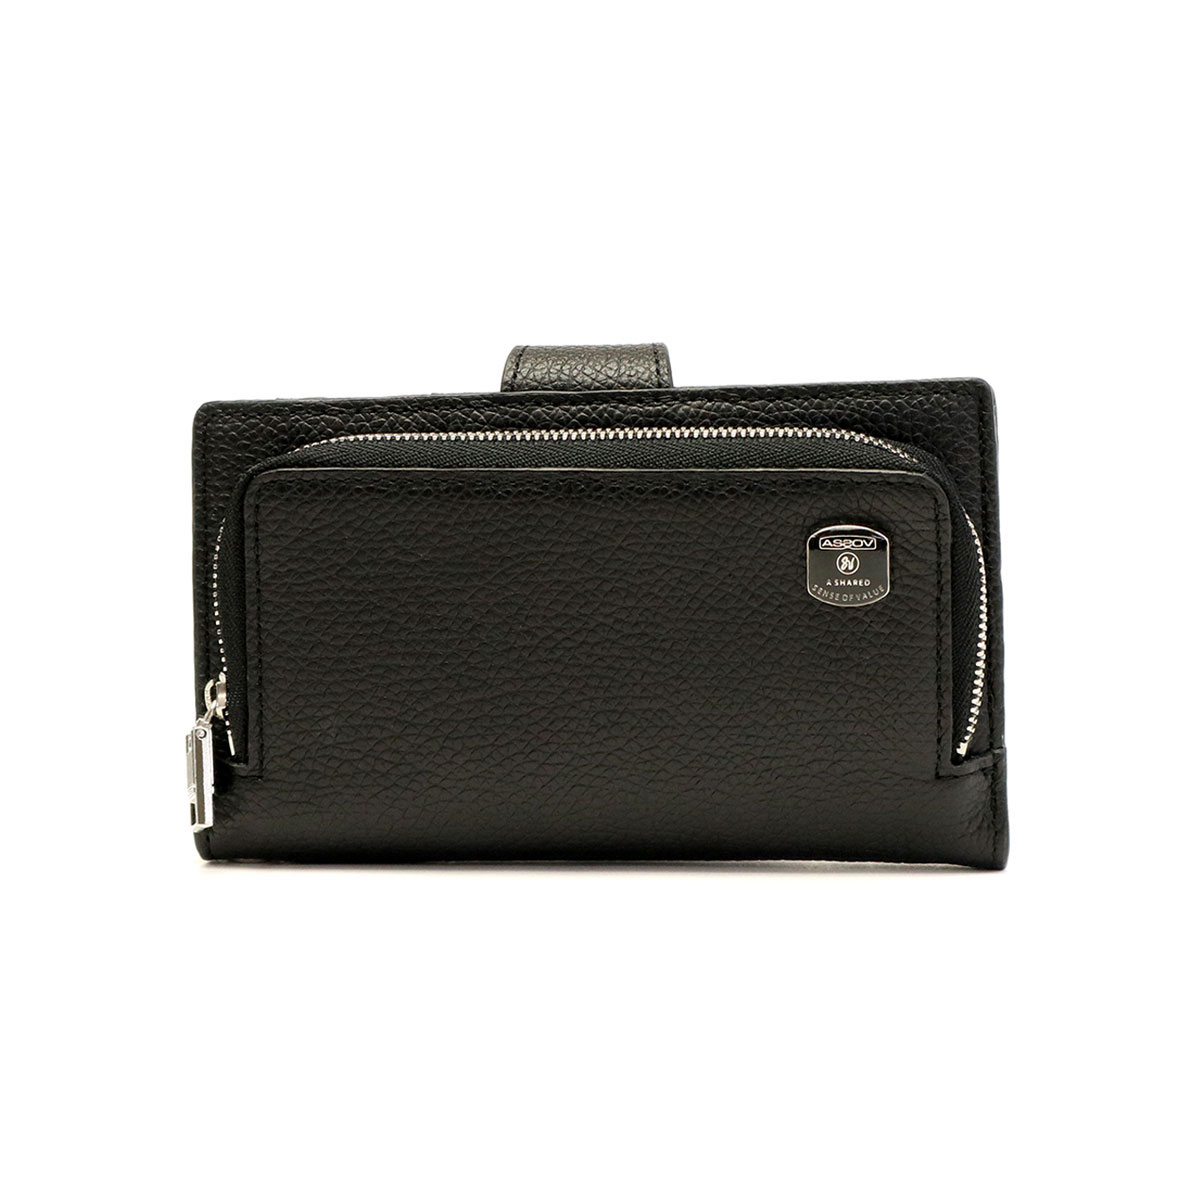 AS2OV アッソブ SHRINK LEATHER MOBILE WALLET MOBILE MULTI CASE S 081705 ギャレリアモール/.galleria【全品送料無料】